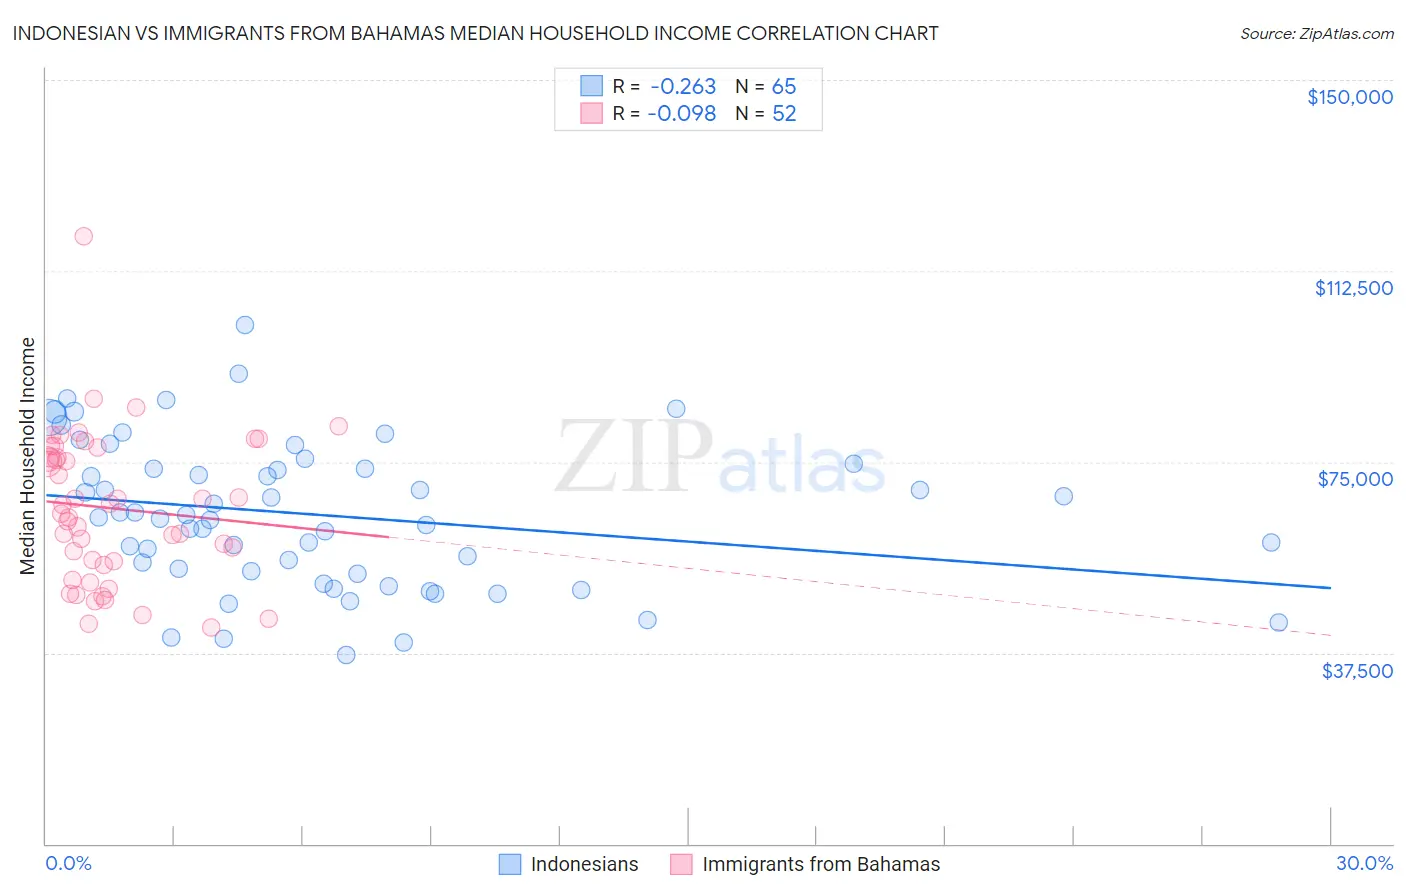 Indonesian vs Immigrants from Bahamas Median Household Income